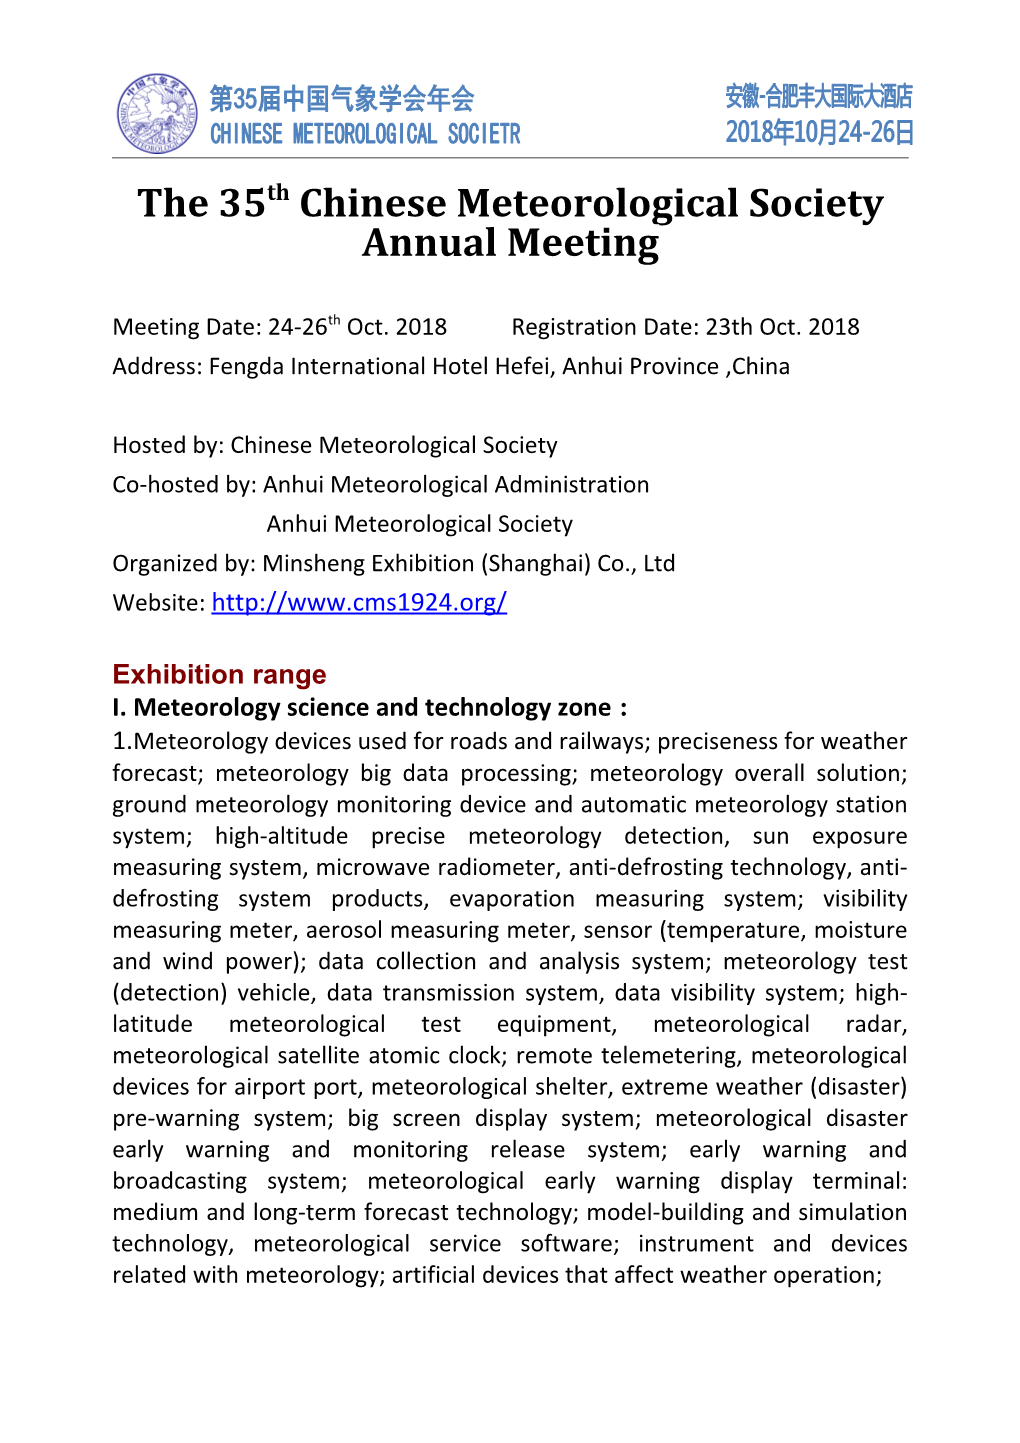 The 35Th Chinese Meteorological Society Annual Meeting